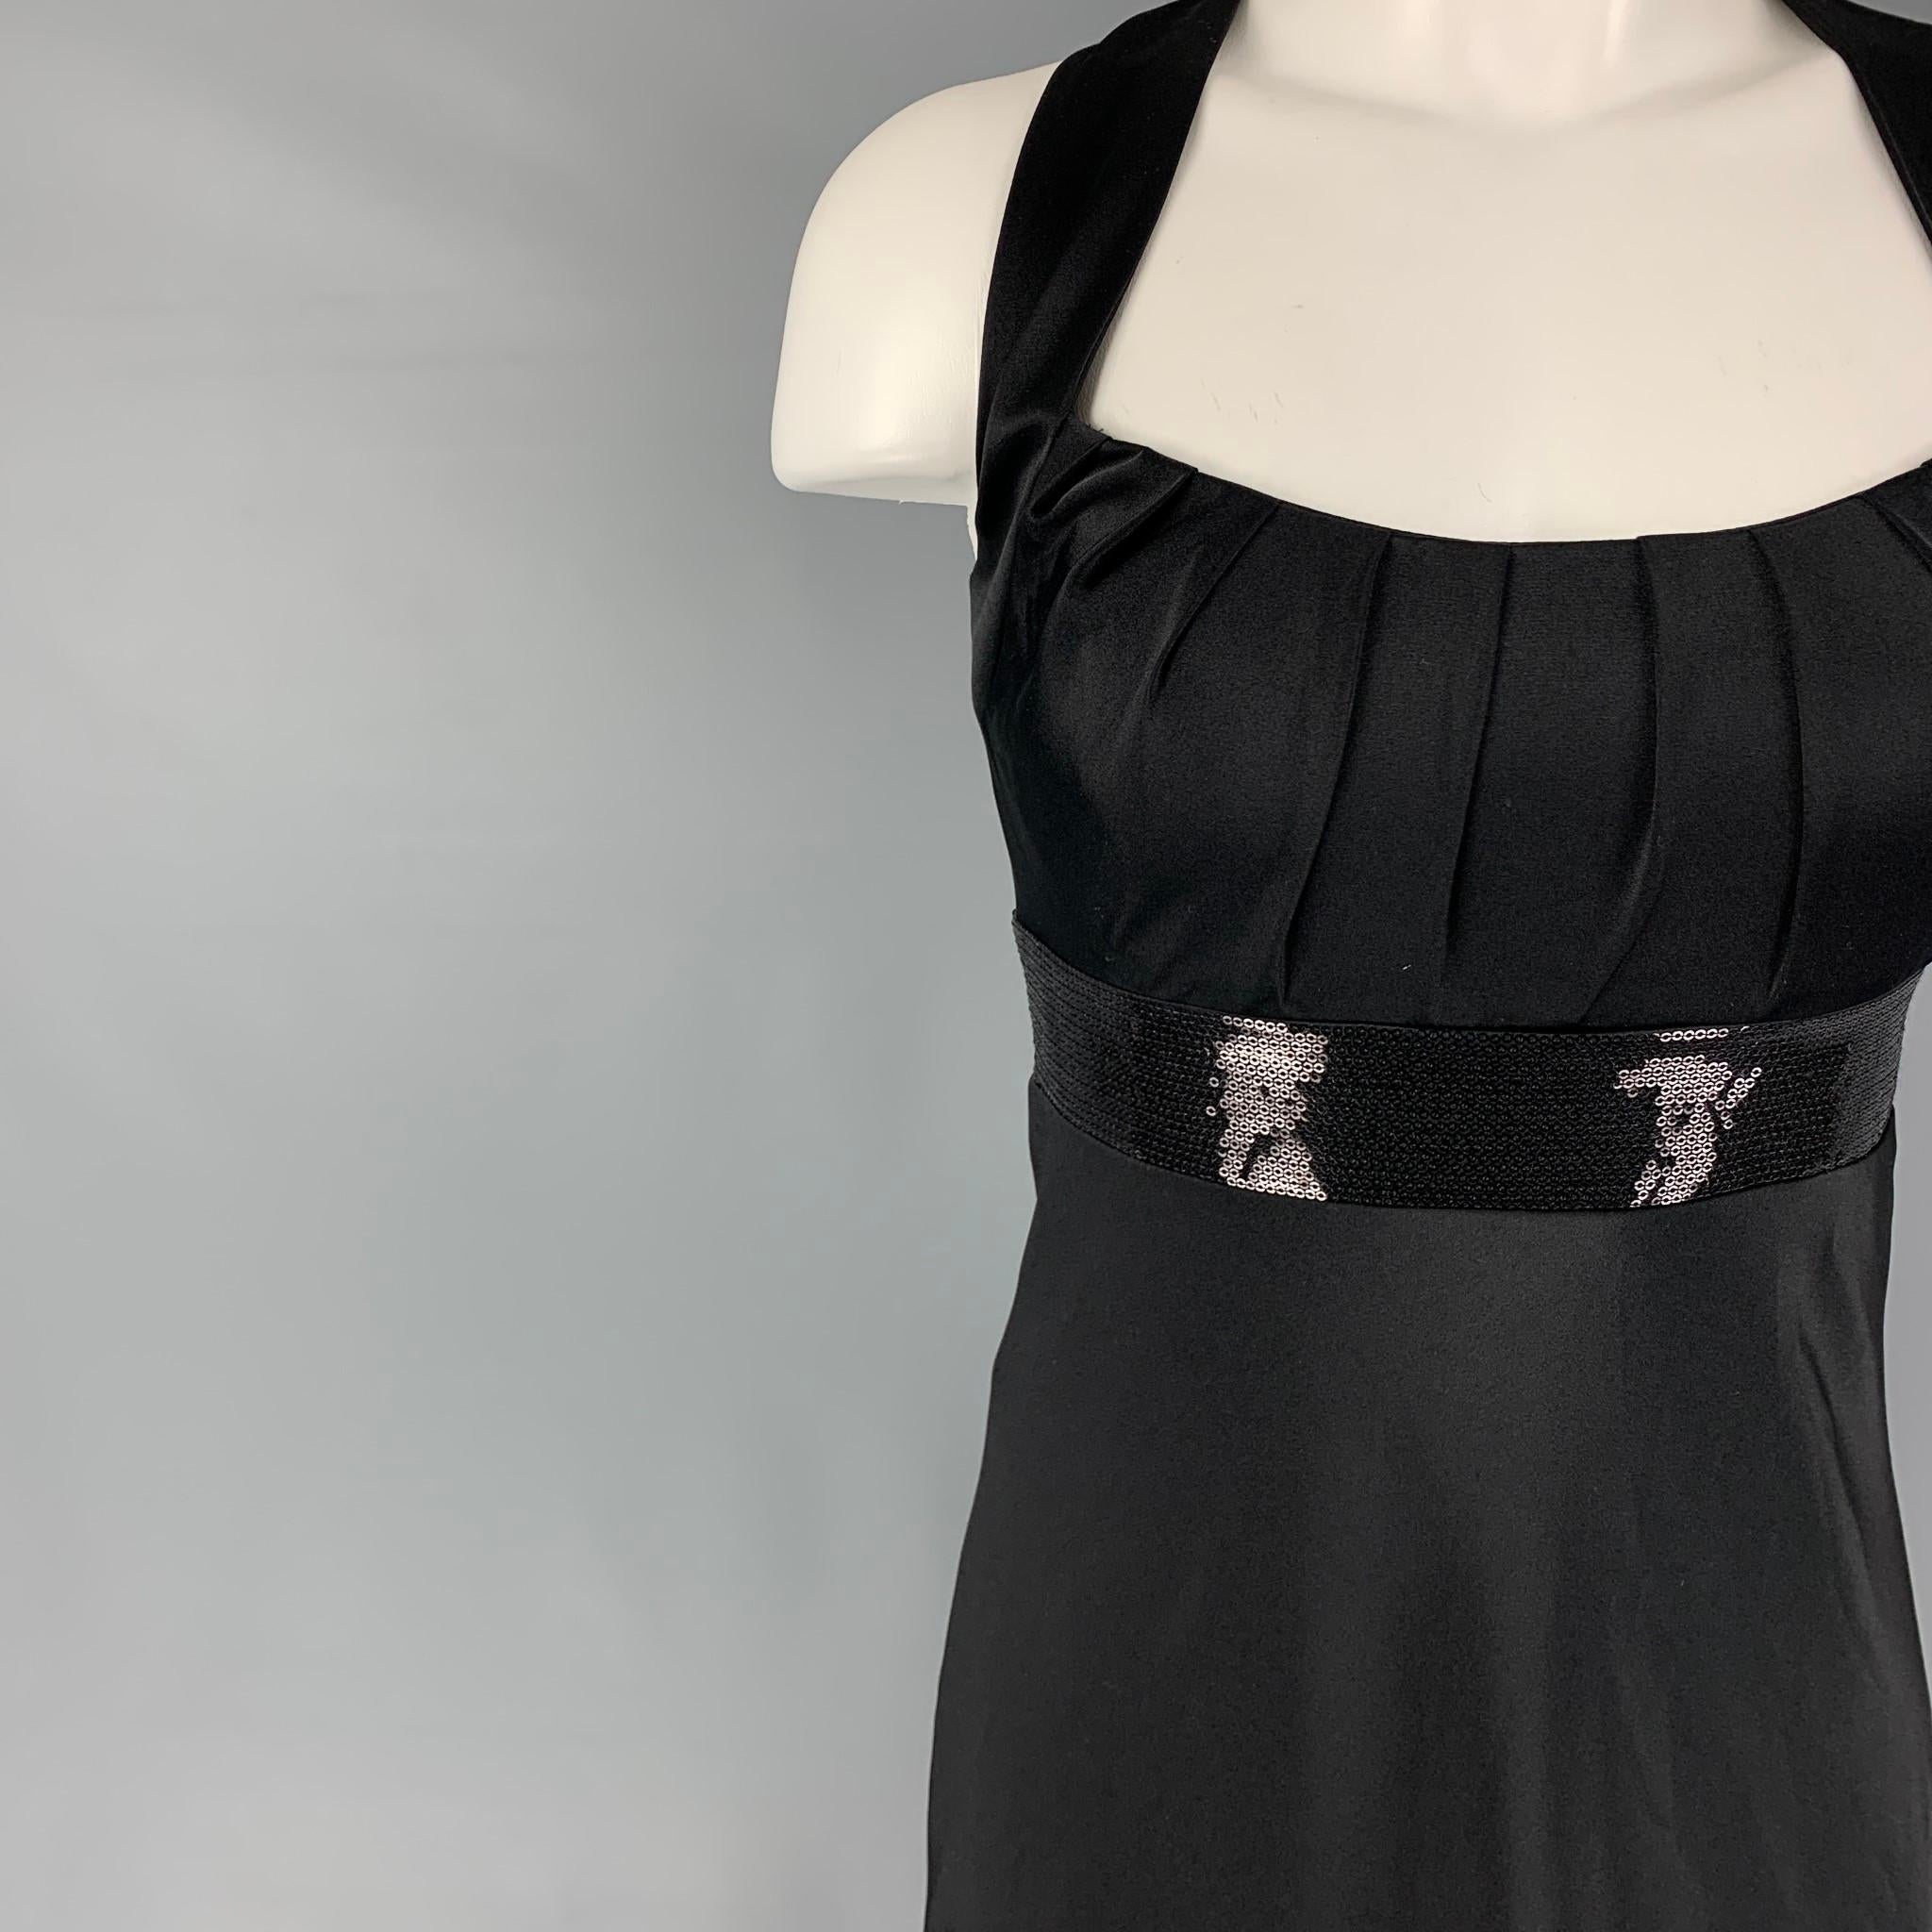 CALVIN KLEIN dress comes in a black polyester with a slip liner featuring a sequined panel detail, criss cross back, sleeveless, and a back zipper closure. 

New with tags. 
Marked: 2

Measurements:

Bust: 30 in.
Waist: 26 in.
Hip: 34 in.
Length: 53